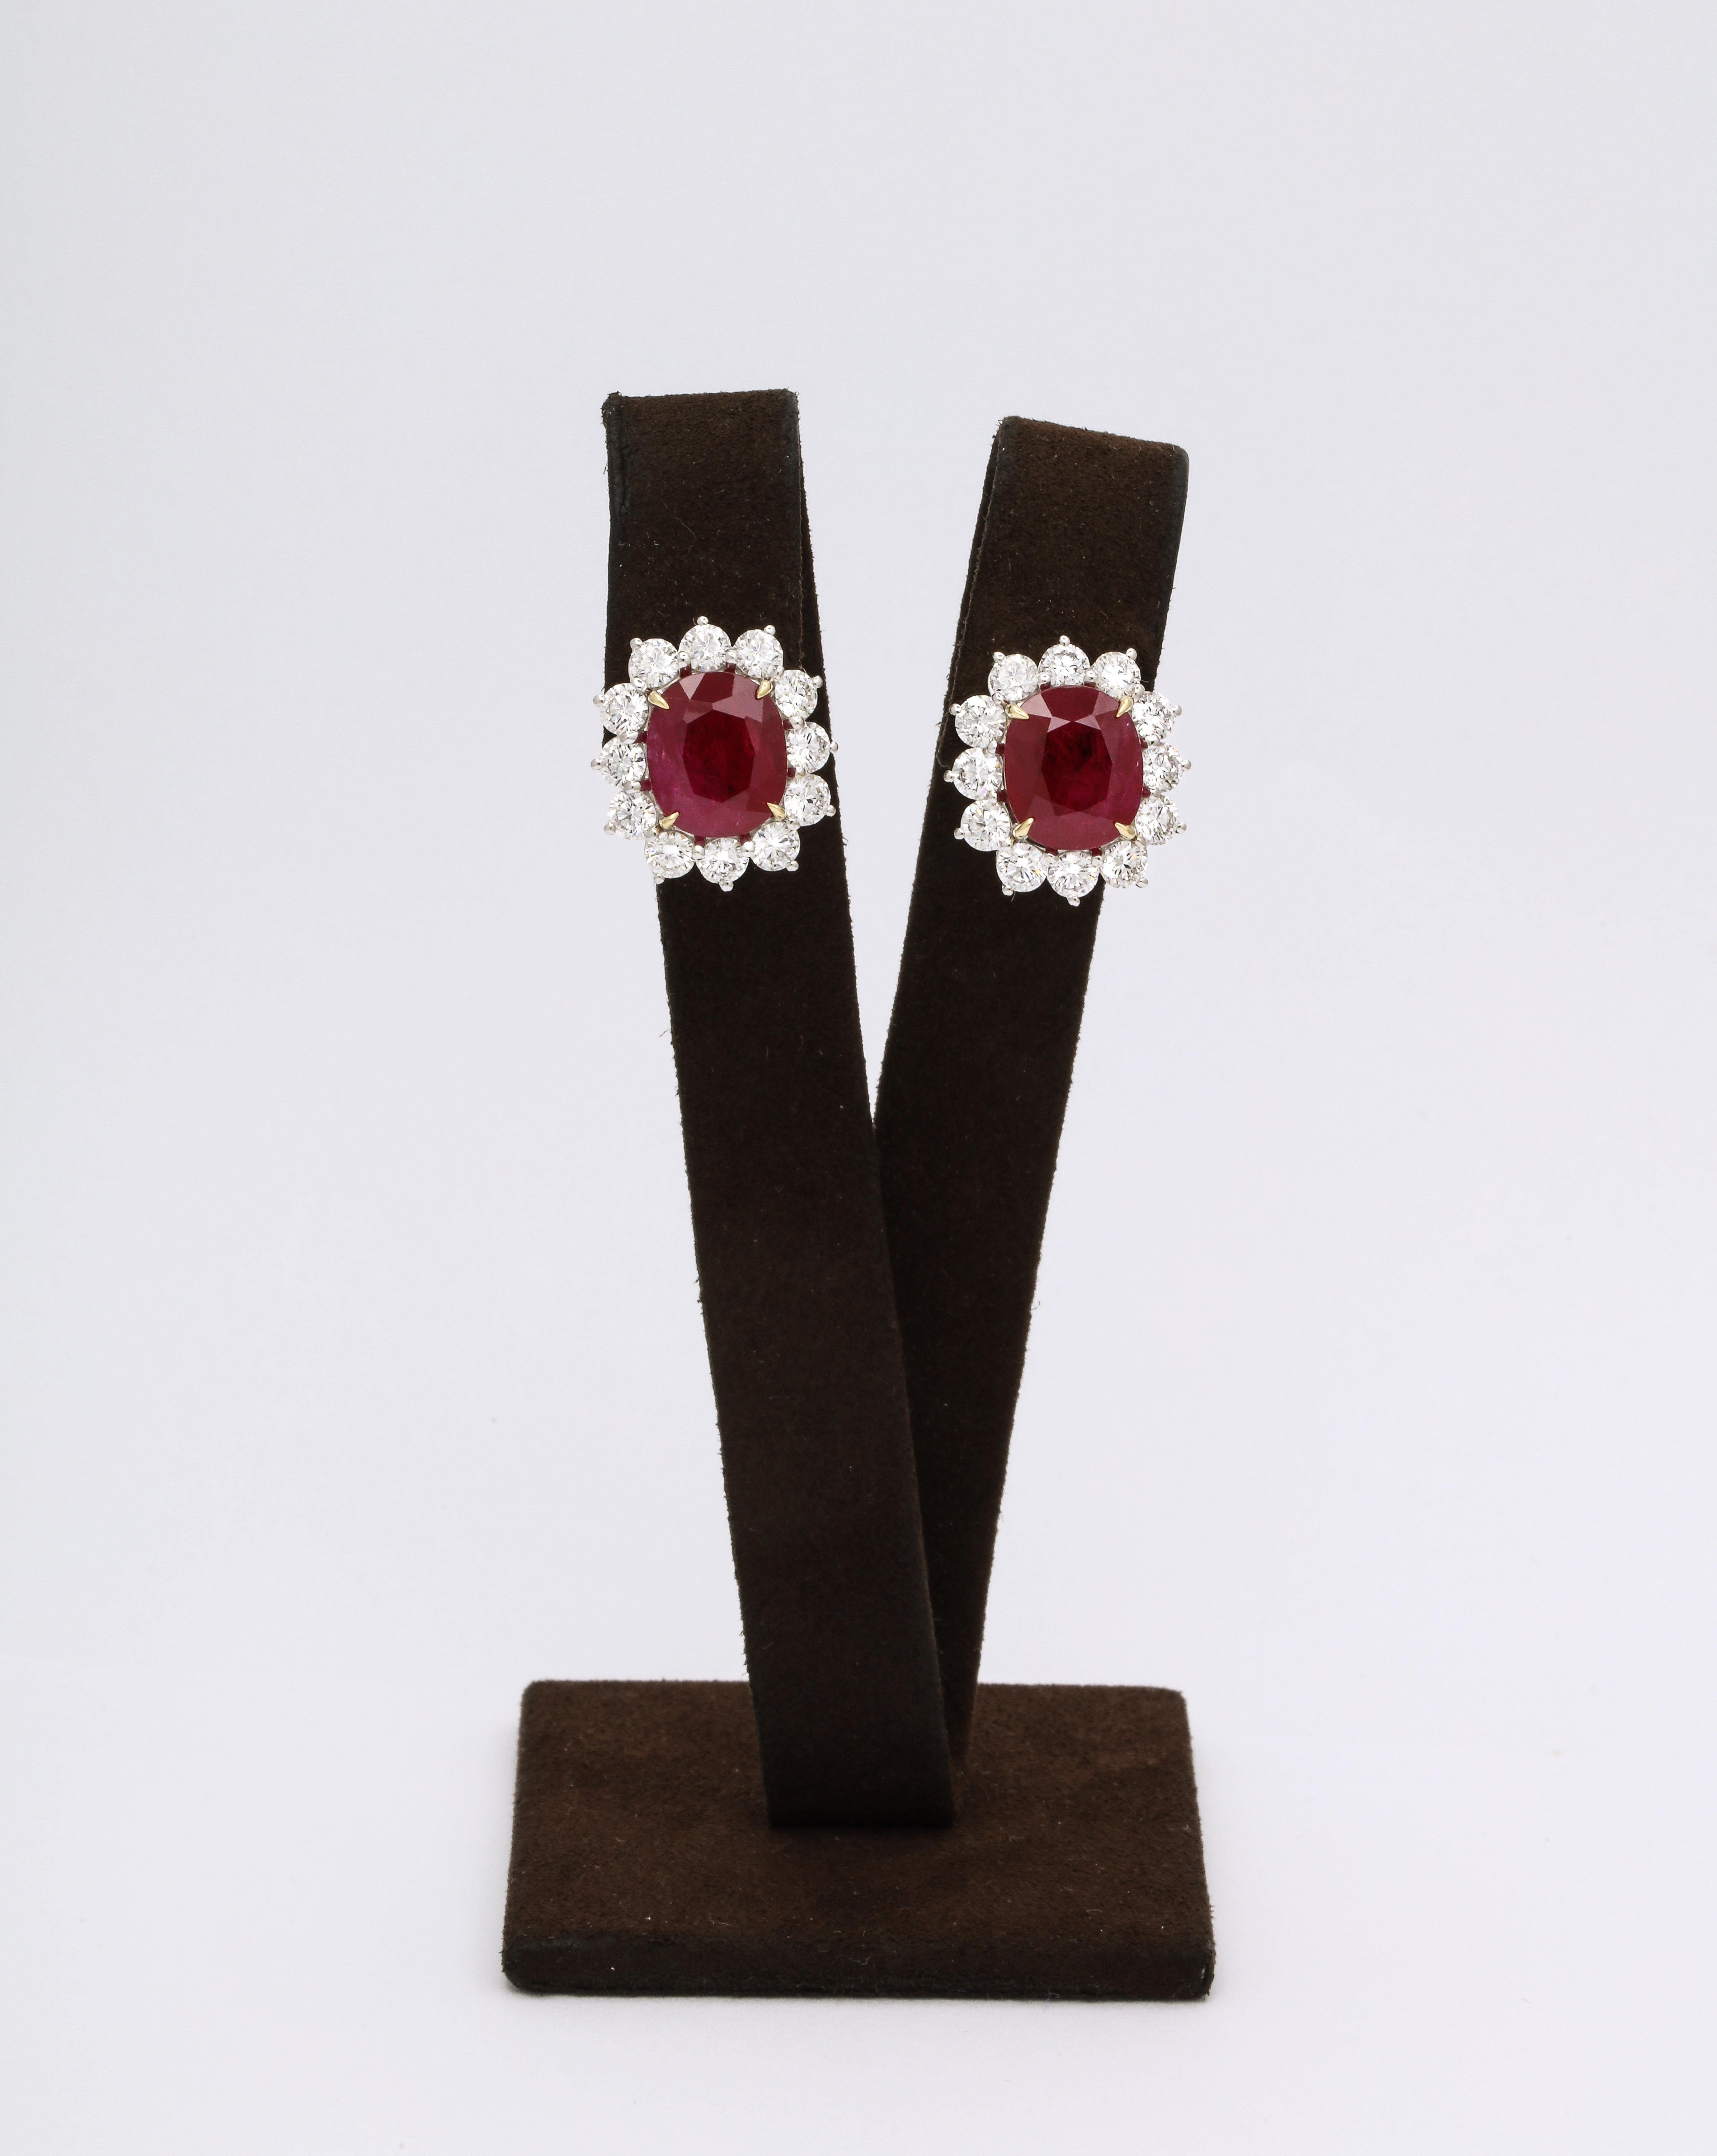 
Certified Cushion cut Intense Red Ruby and Diamond Earrings. 

13.13 carats of fine Ruby 

4.10 carats of white round brilliant cut diamonds 

18k white and yellow gold 

Approximately .75 inches long by .68 inches wide. 